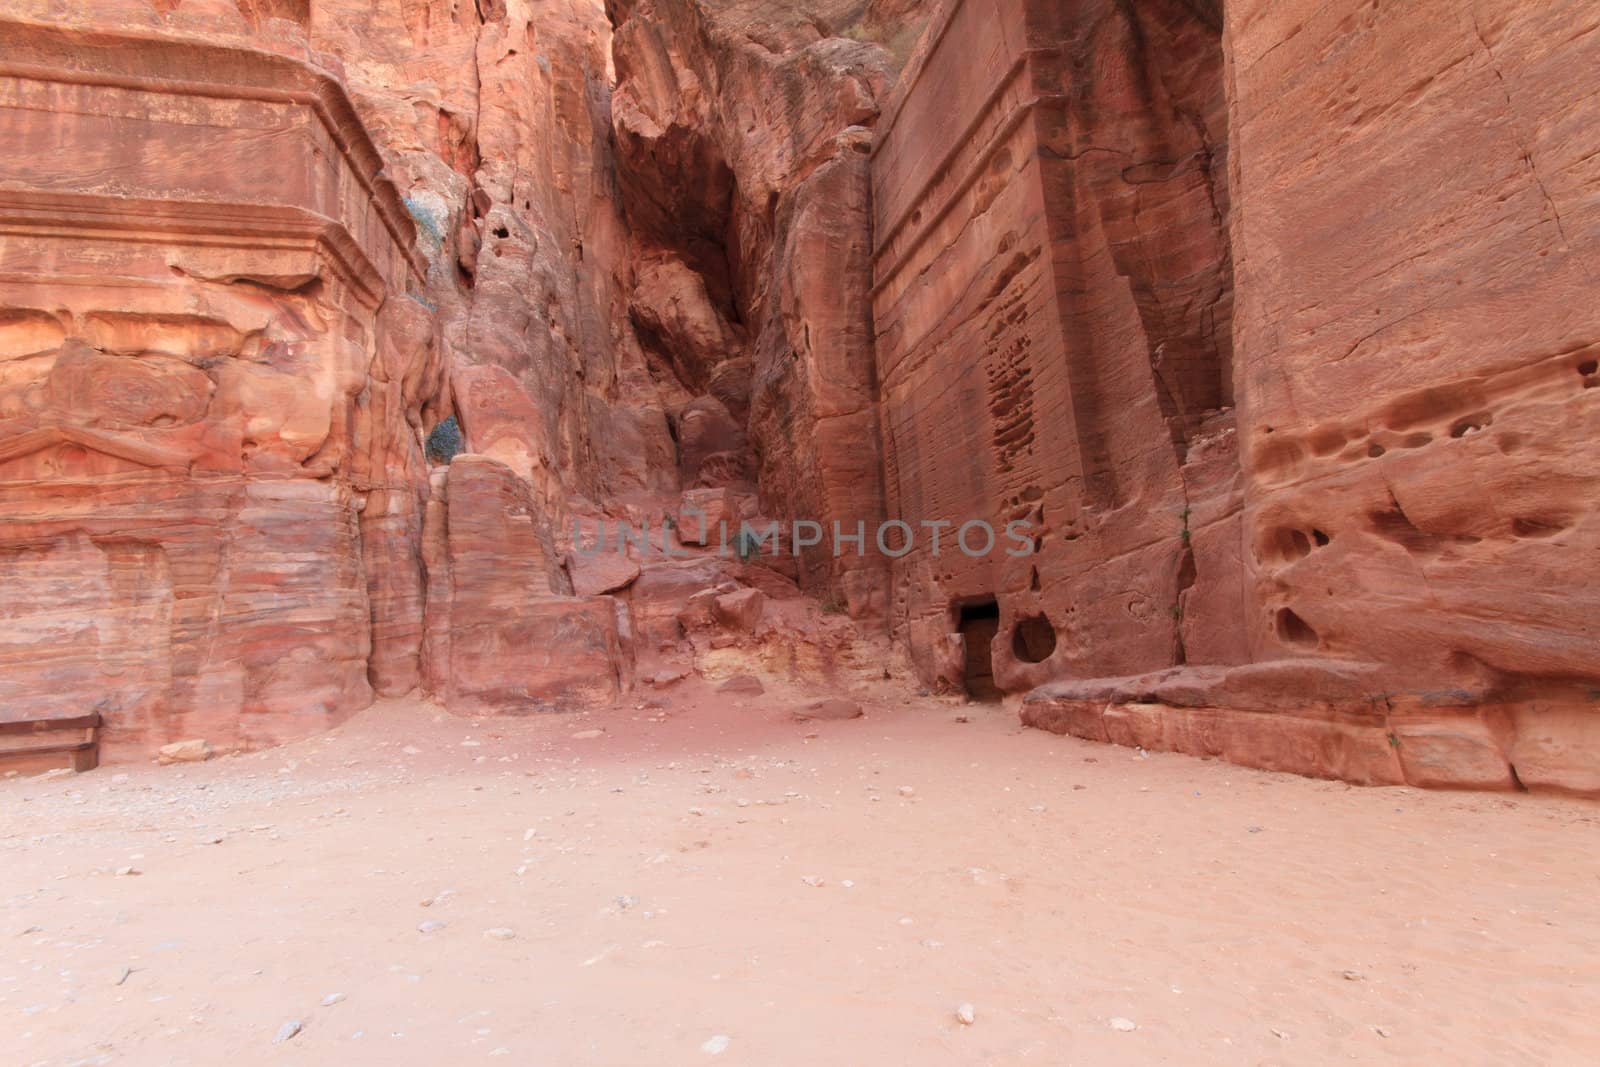 The Outer Siq, in Petra, Jordan  by thanomphong